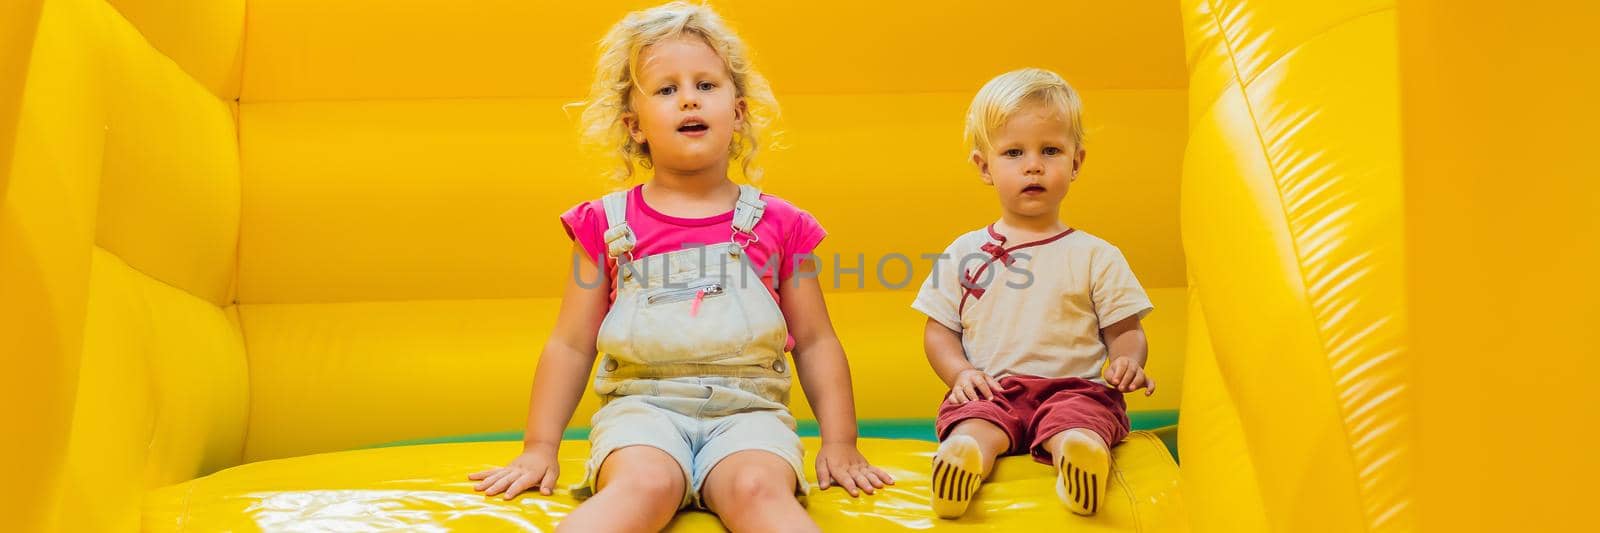 A boy and a girl ride from an inflatable slide BANNER, LONG FORMAT by galitskaya